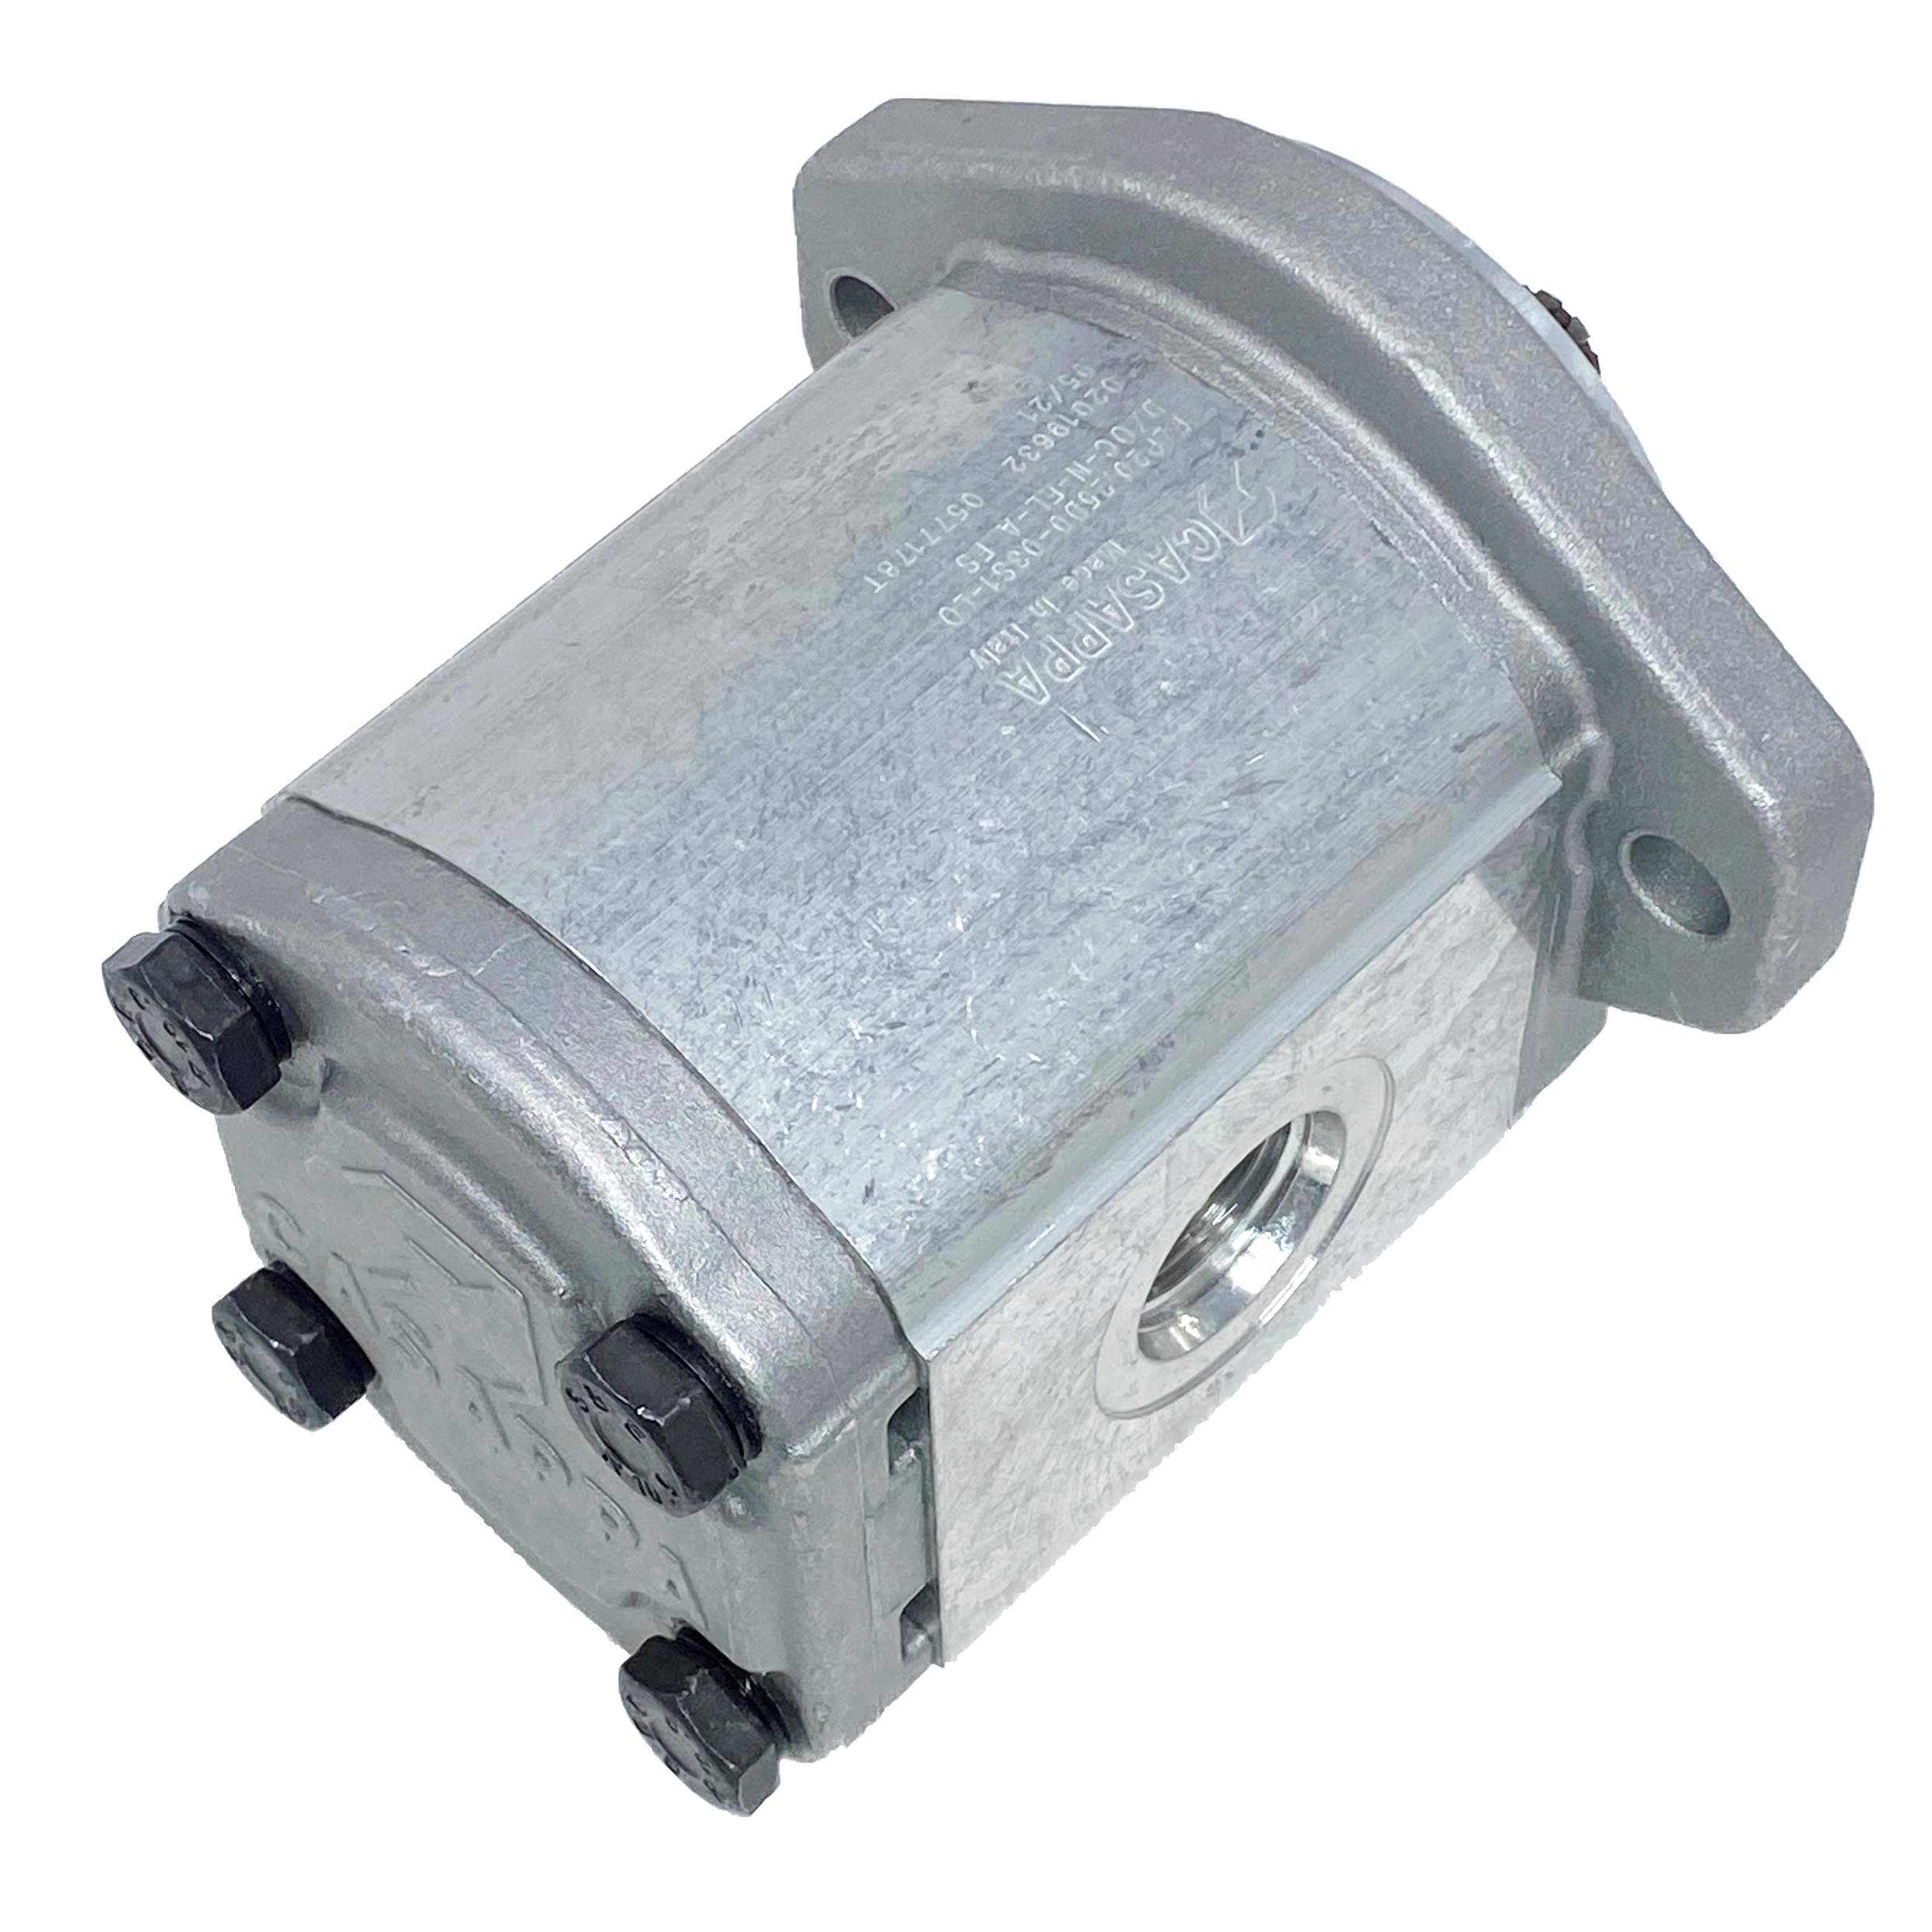 PHP20.31,5S0-07S9-LOG/OC-N-EL : Casappa Polaris Gear Pump, 33.03cc, 2900psi Rated, 2500RPM, CCW, 11T 16/32dp Shaft, SAE A 2-Bolt Flange, 1.25" #20 SAE Inlet, 0.625 (5/8") #10 SAE Outlet, Cast Iron Body, Aluminum Flange